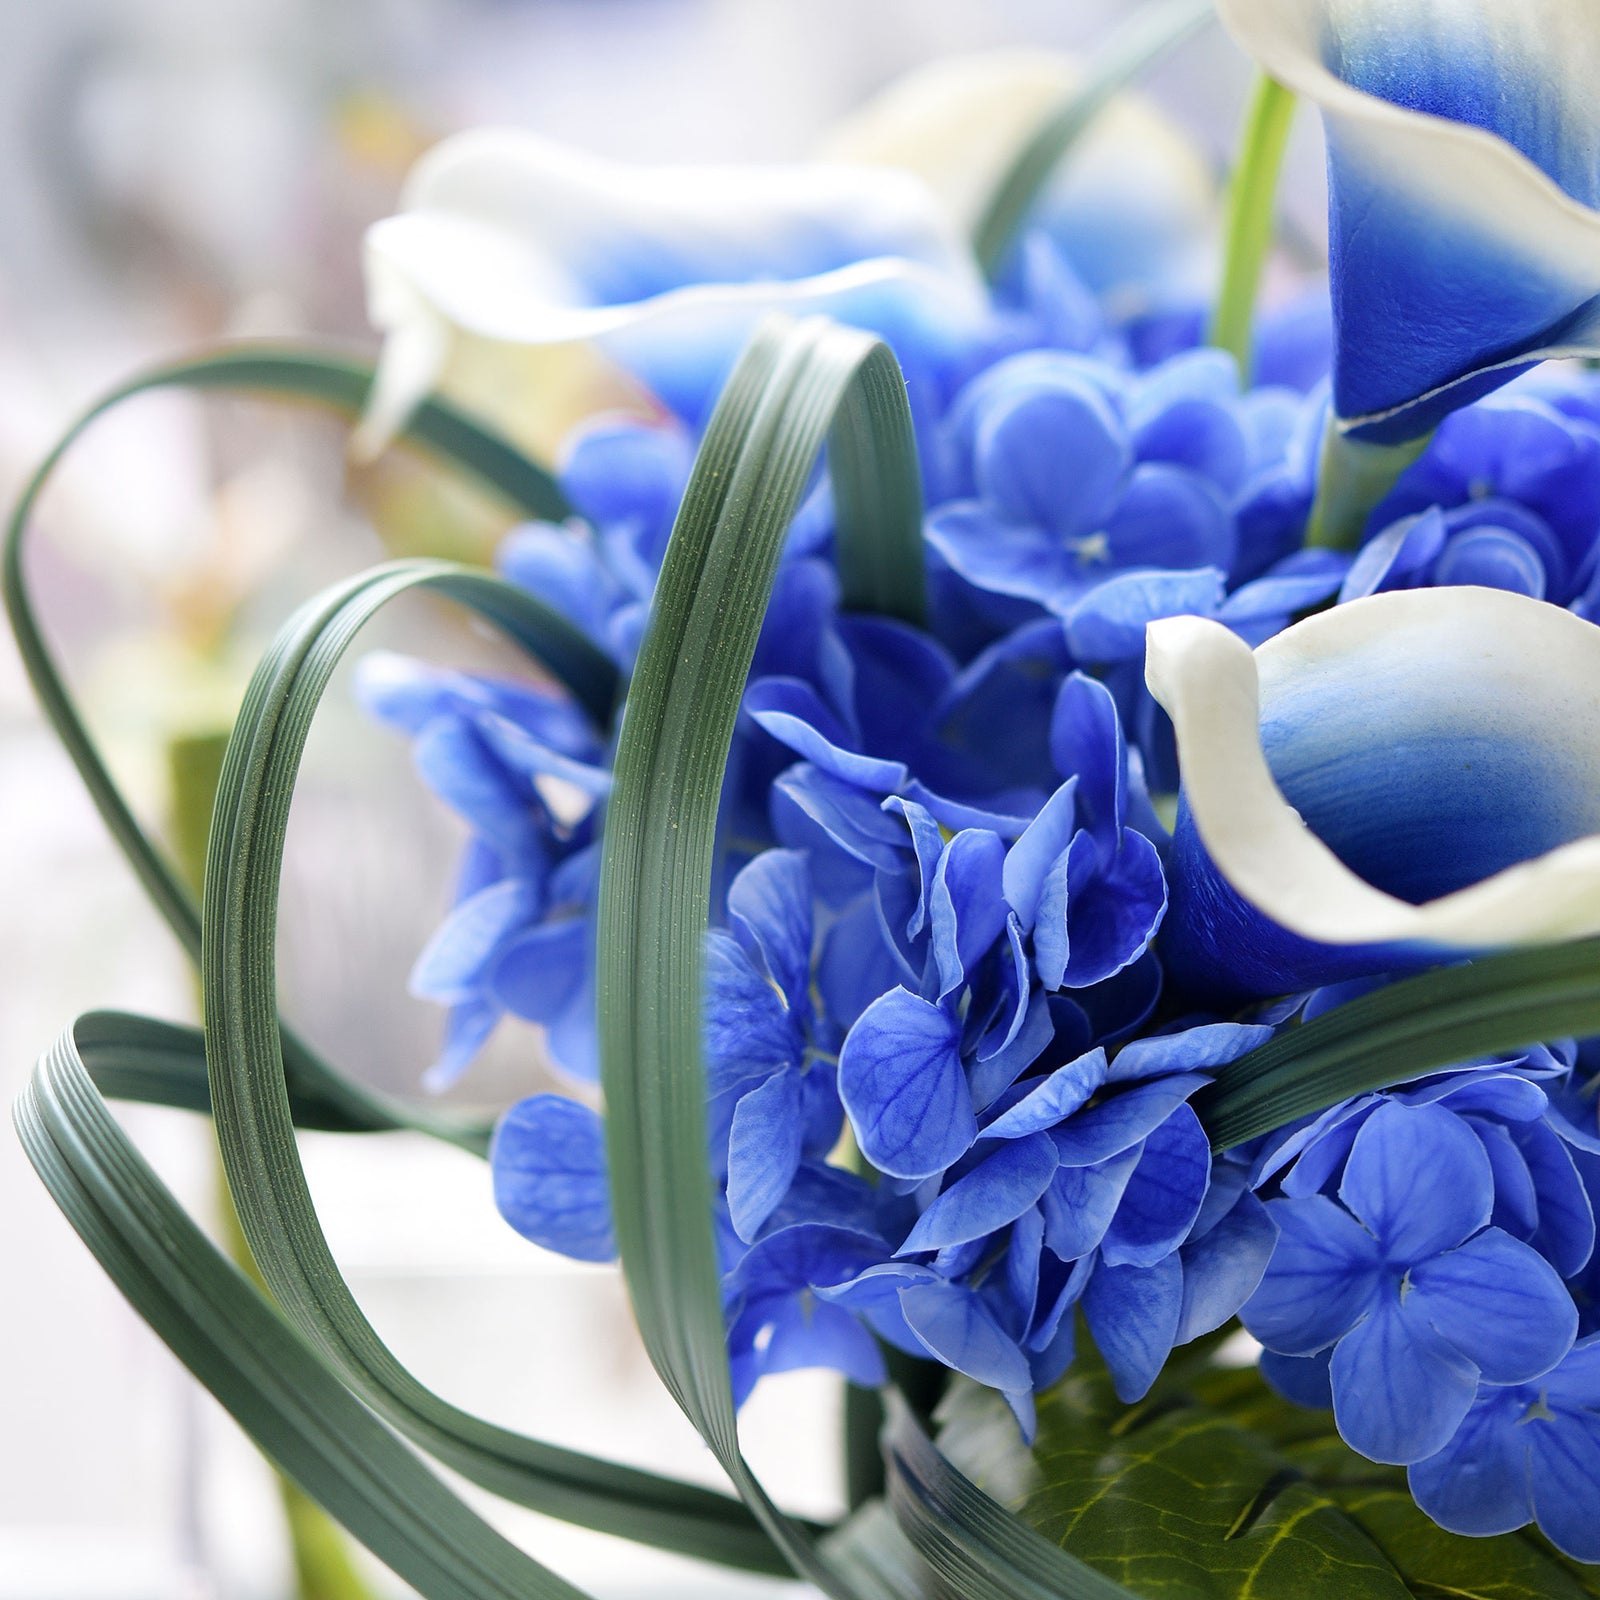 Real Touch Royal Blue Hydrangea and Blue with White Call Lilies Mix Flower Bouquet Artificial Flowers Arrangement 14 Stems